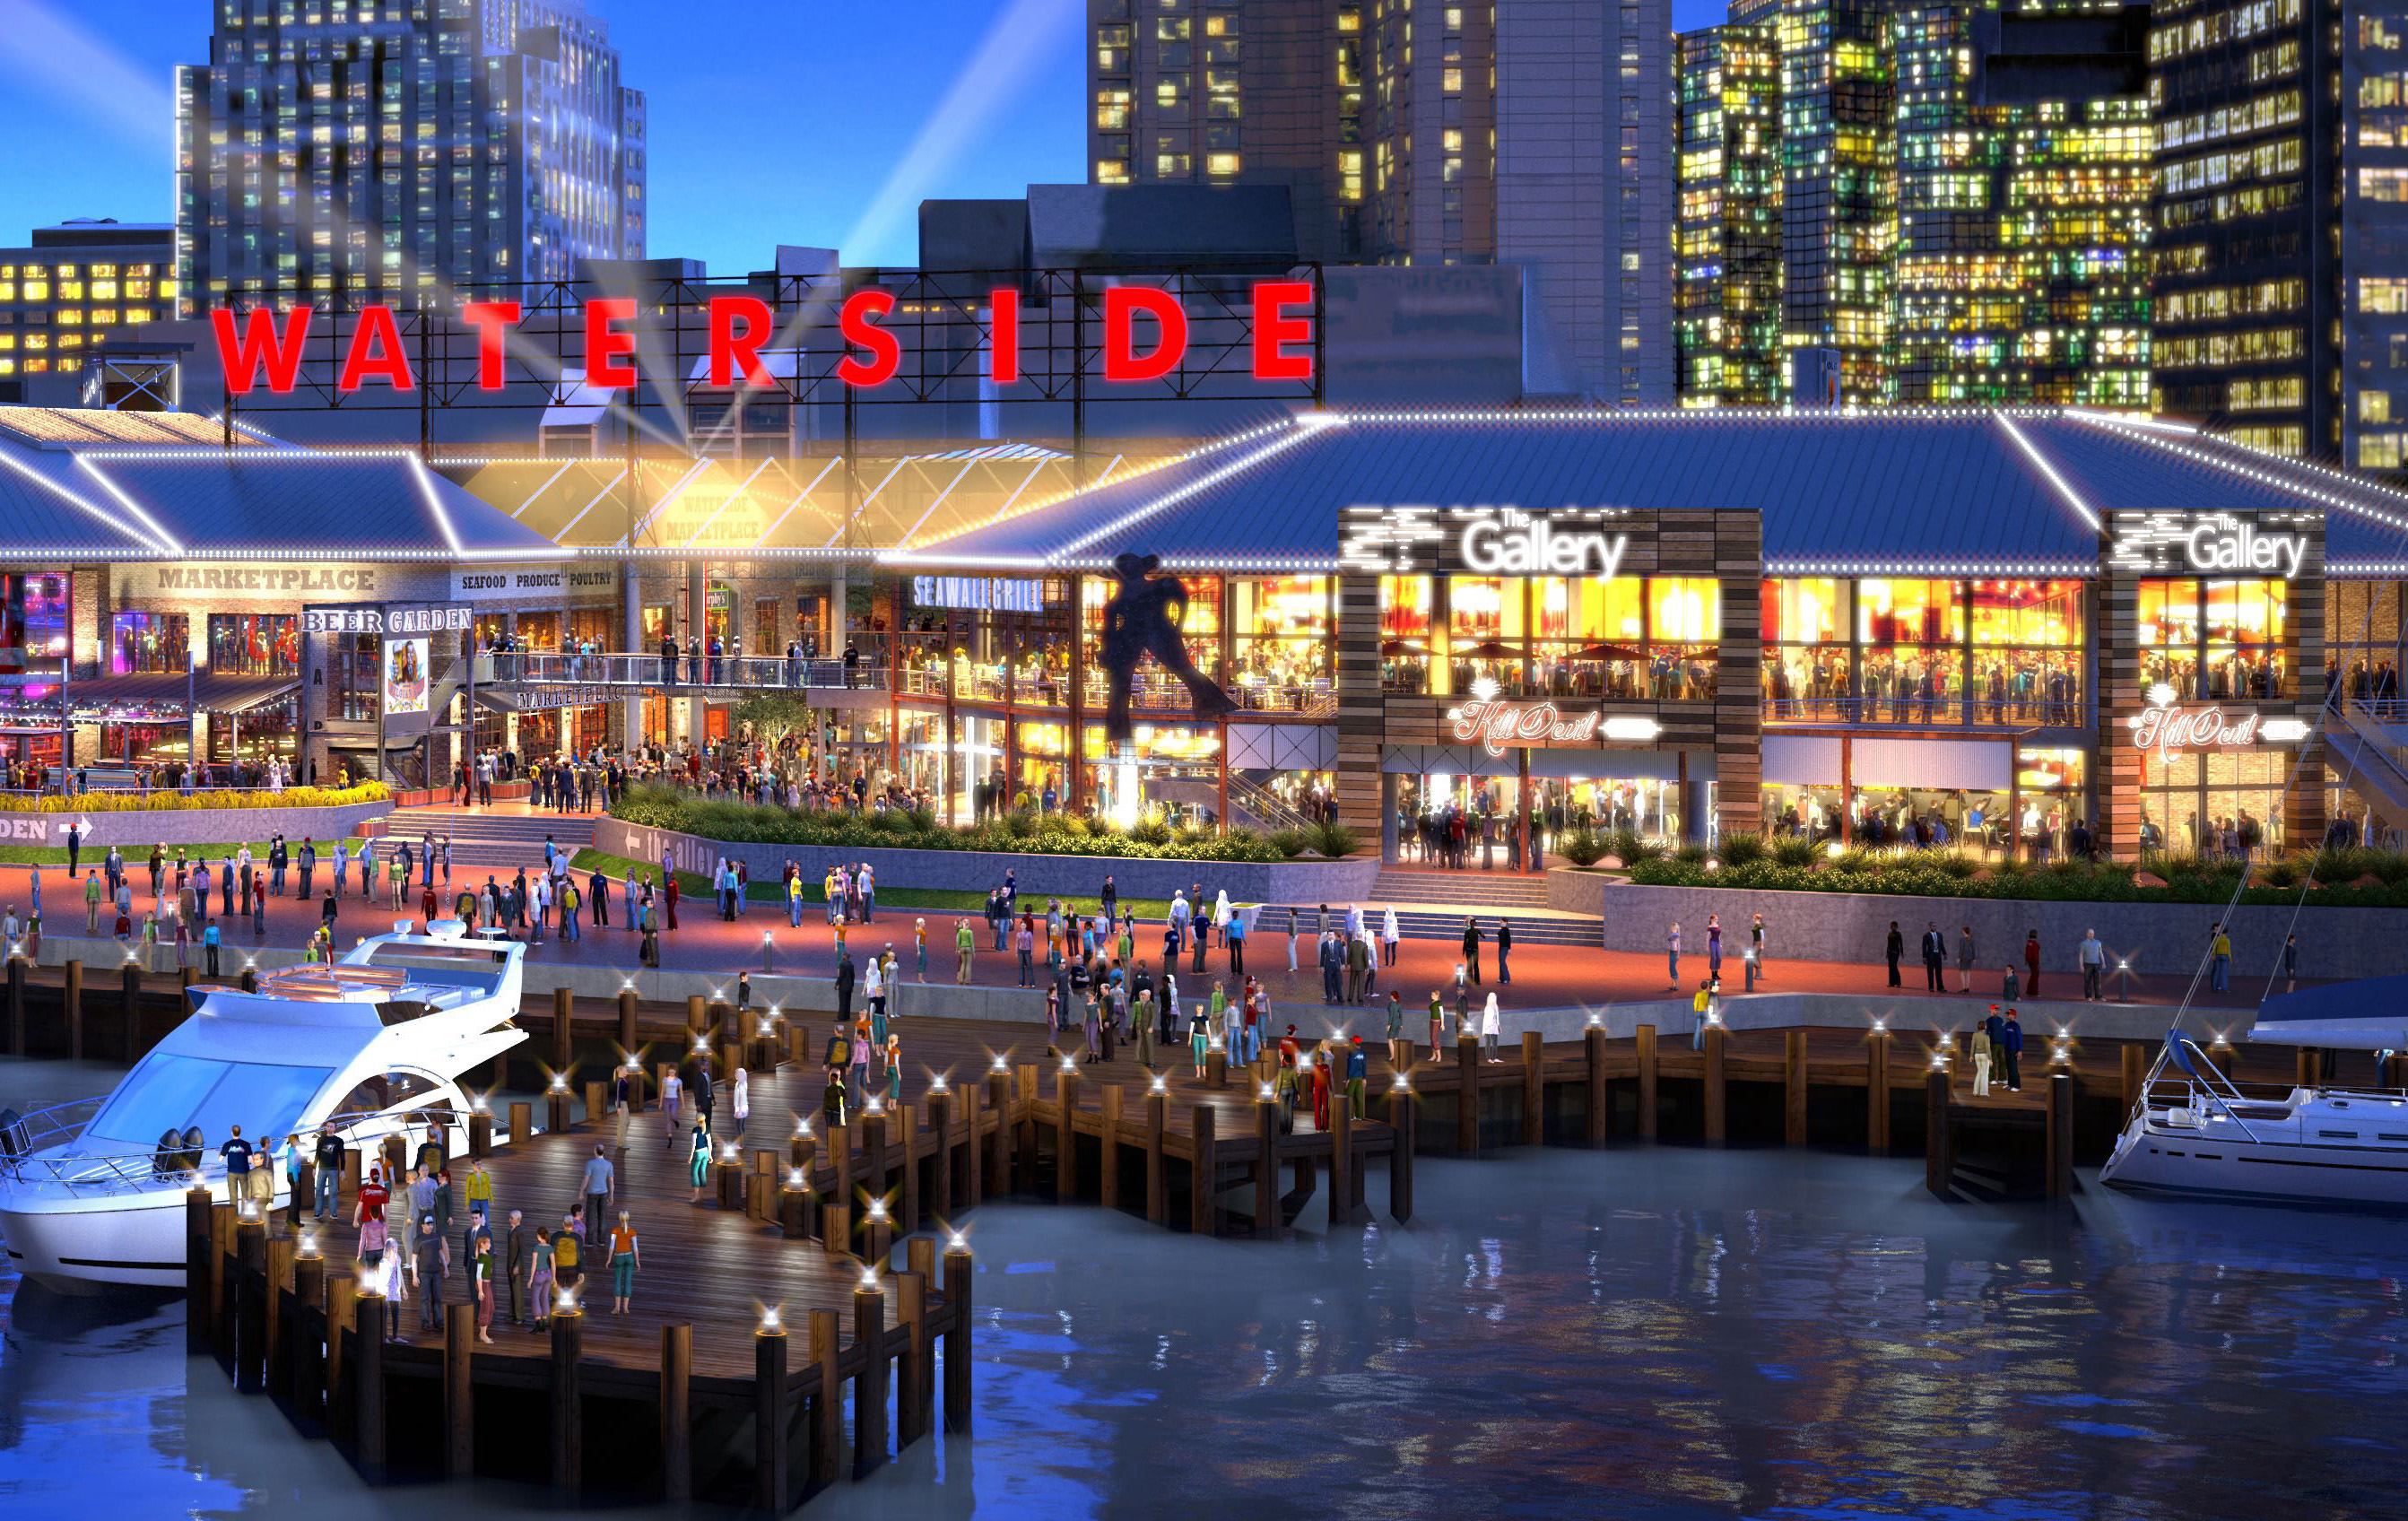 3 Reasons Why I'm Excited About the Waterside District Coming to